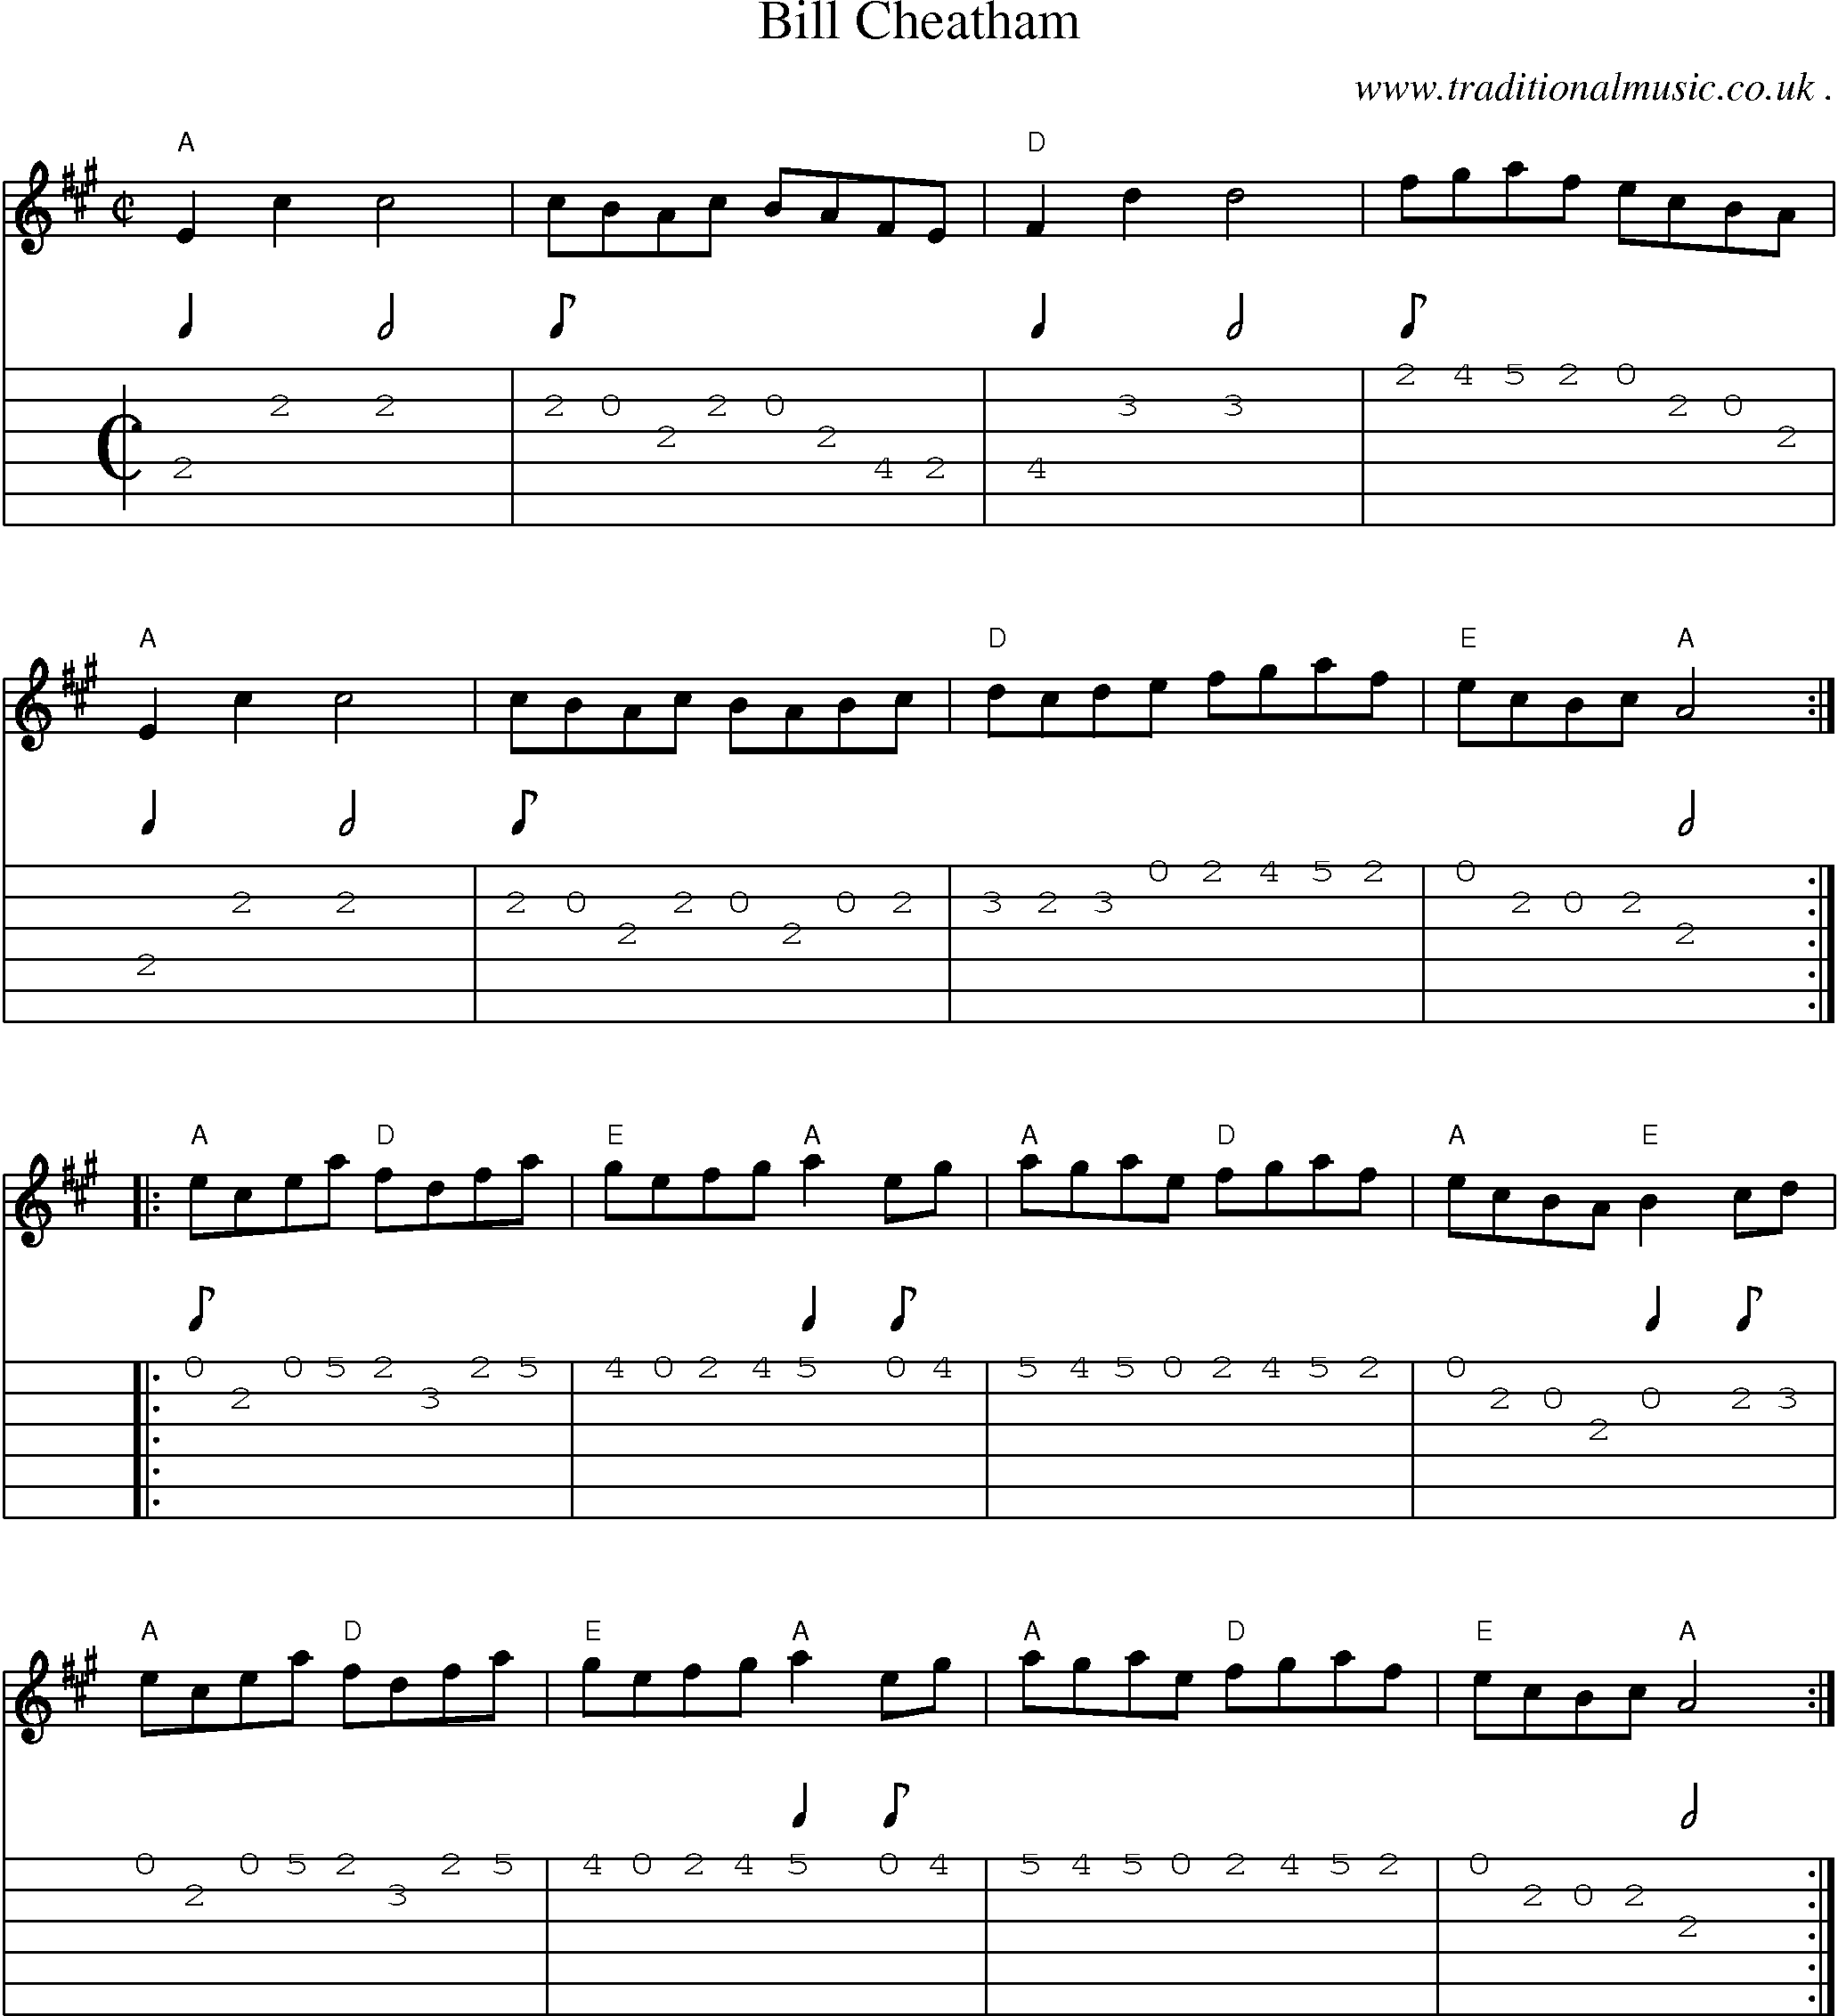 Music Score and Guitar Tabs for Bill Cheatham